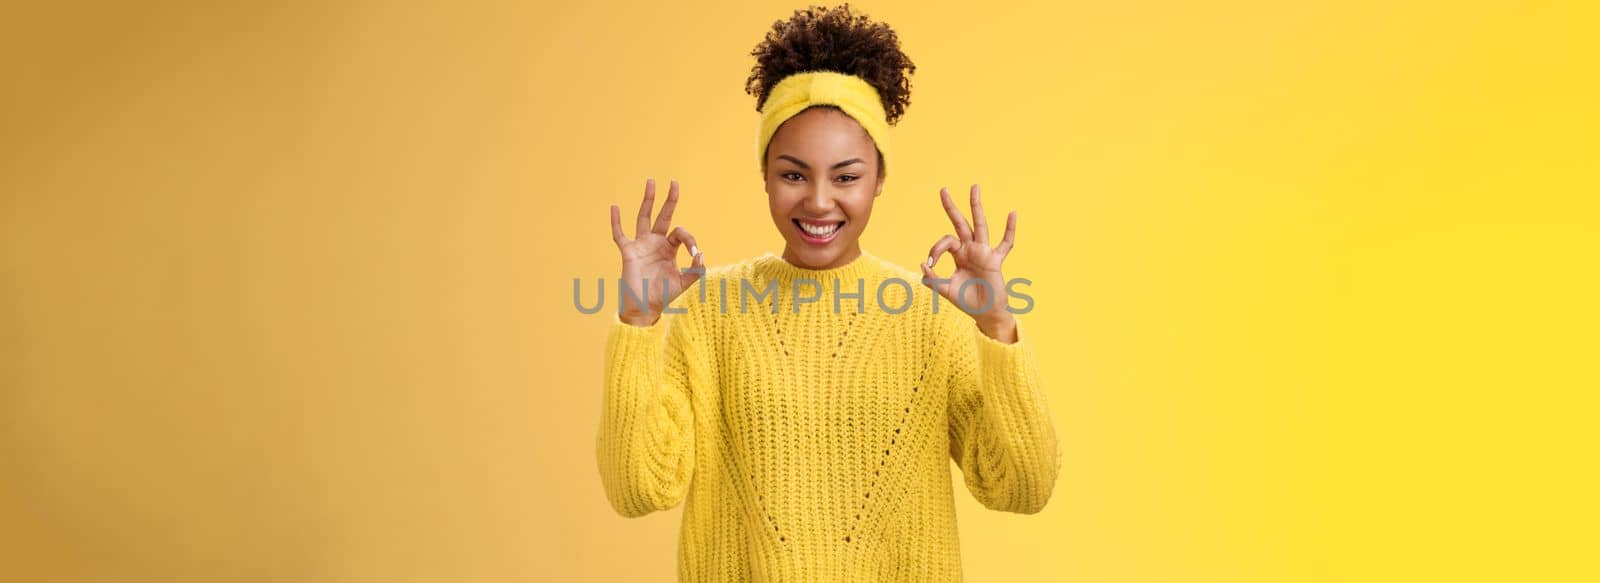 Count it done. Assured confident african-american woman in sweater headband show okay ok no worries gesture smiling self-assured plan goes fine, pleased good results, cheering yellow background.